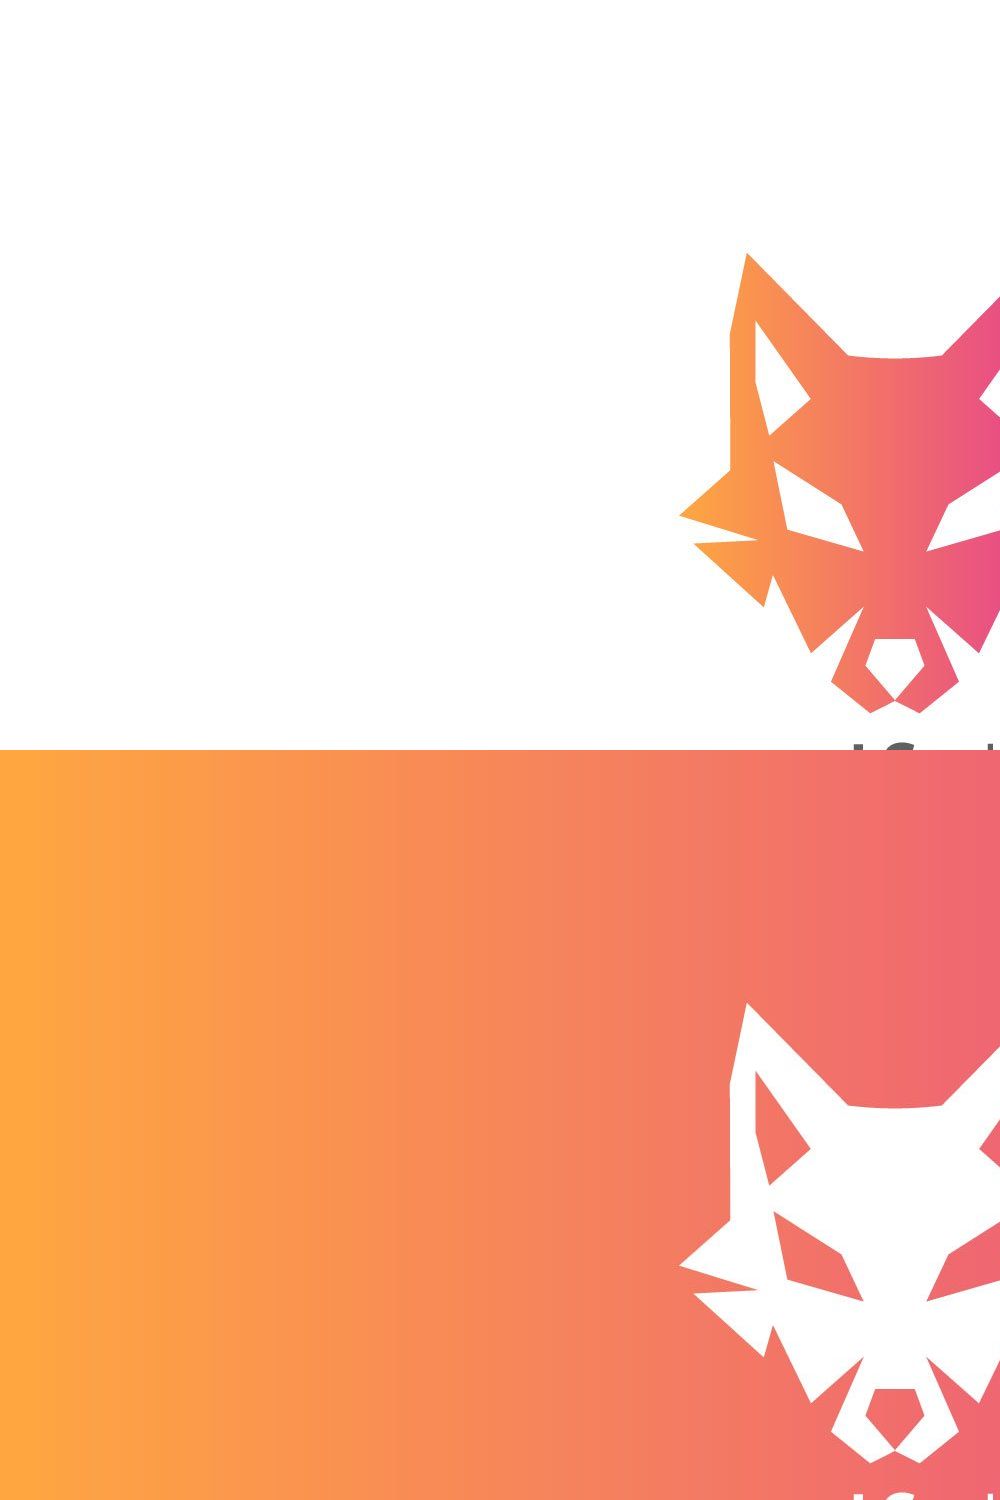 Wolf logo pinterest preview image.